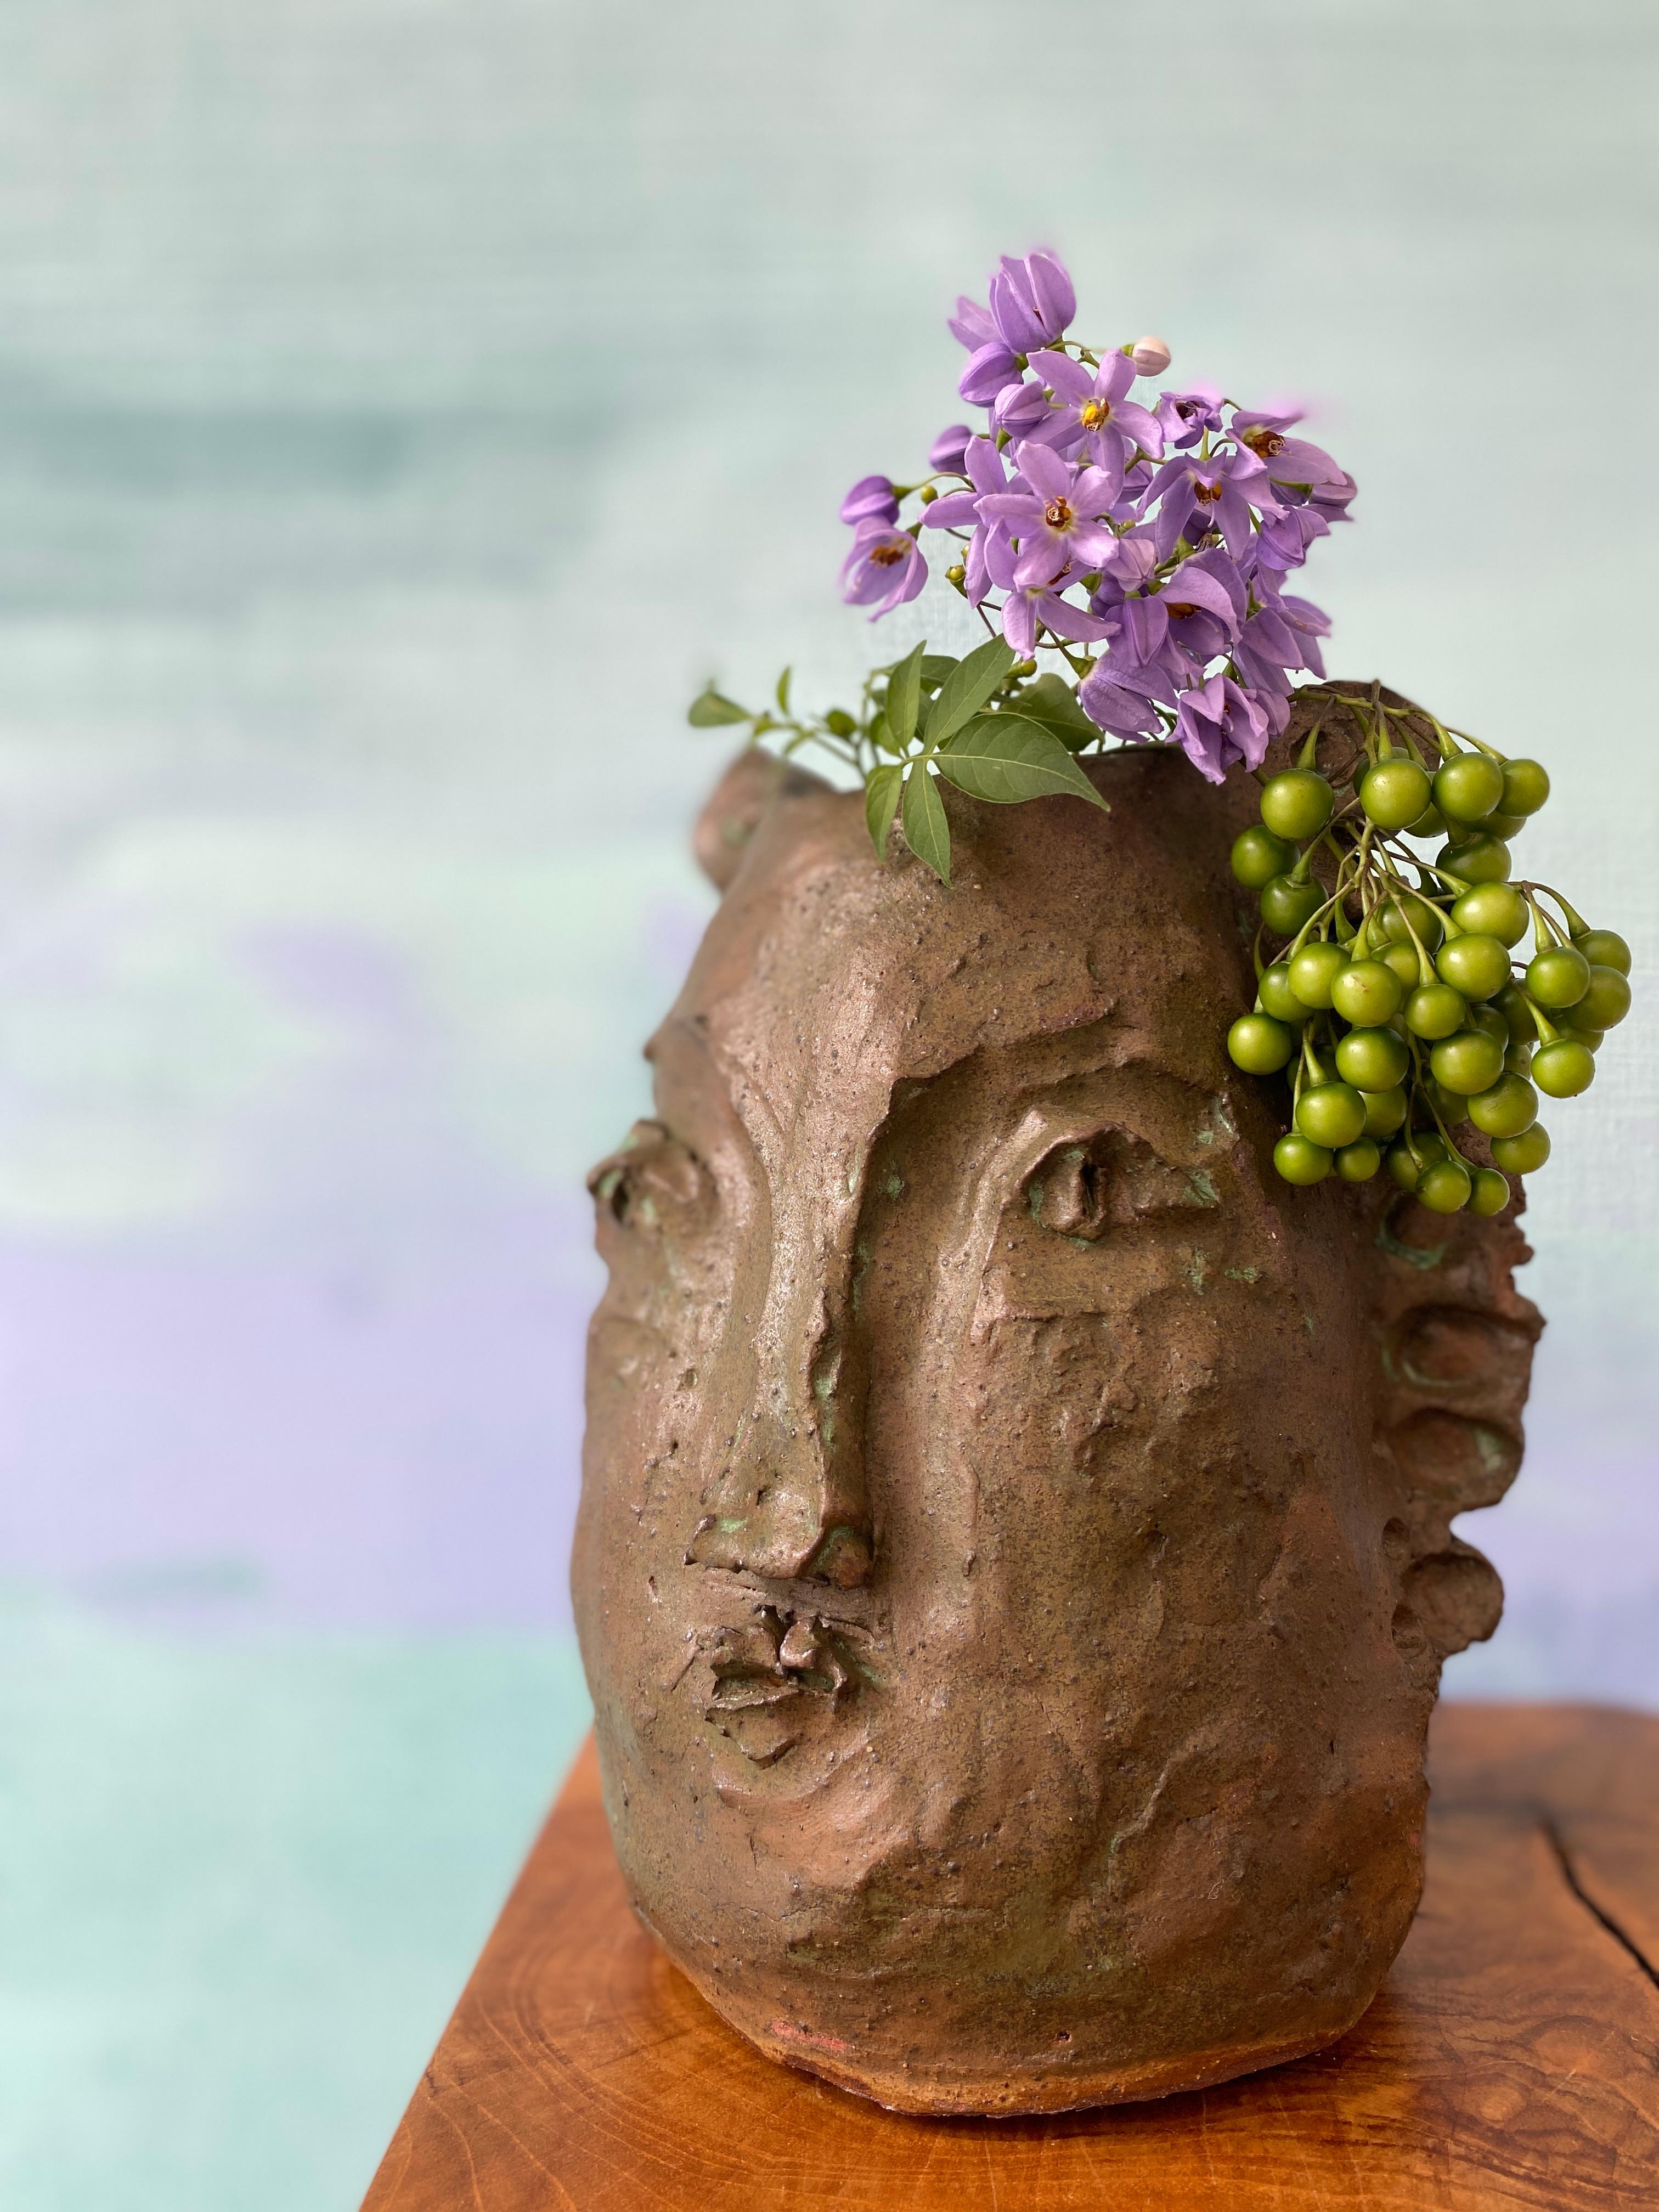 Wabi sabi beauty in imperfection, appreciate simplicity, handmade unique sculpture.

Elevate your space with this extraordinary exquisitely sculpted clay face and head vase creation that promises to captivate and inspire. Transform your home decor